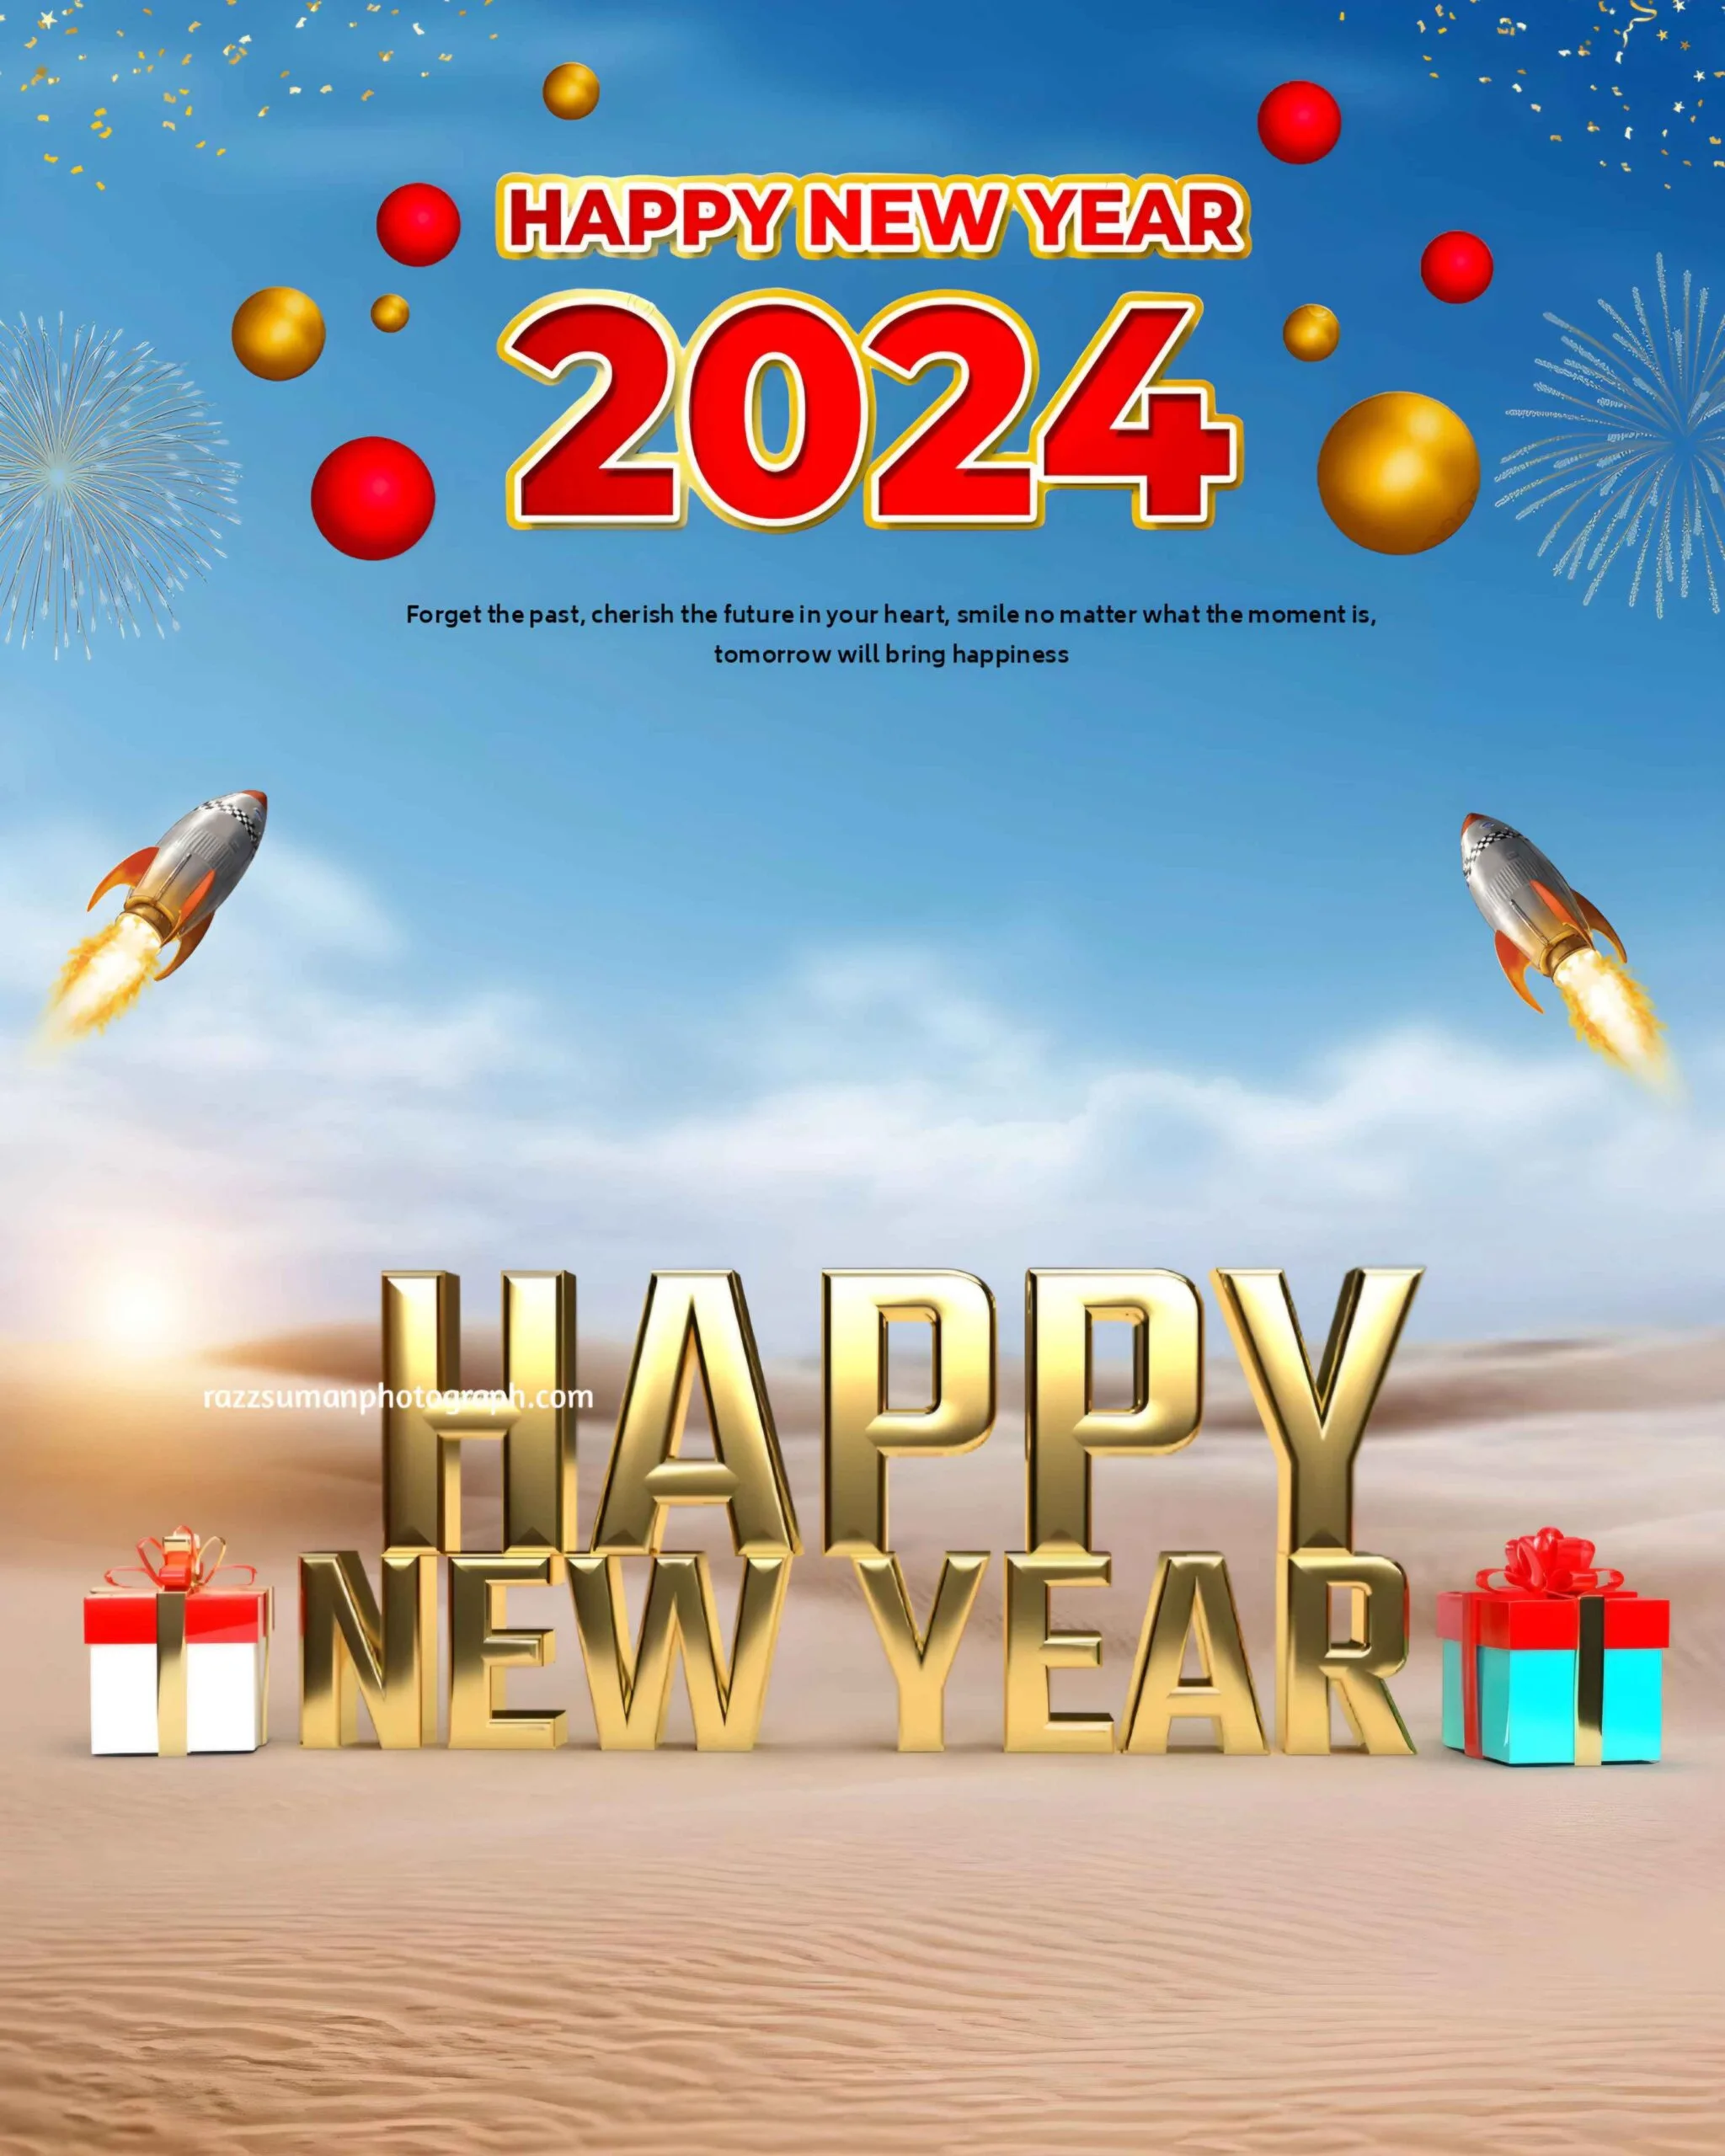 New Year 2024 HD Image for Editing